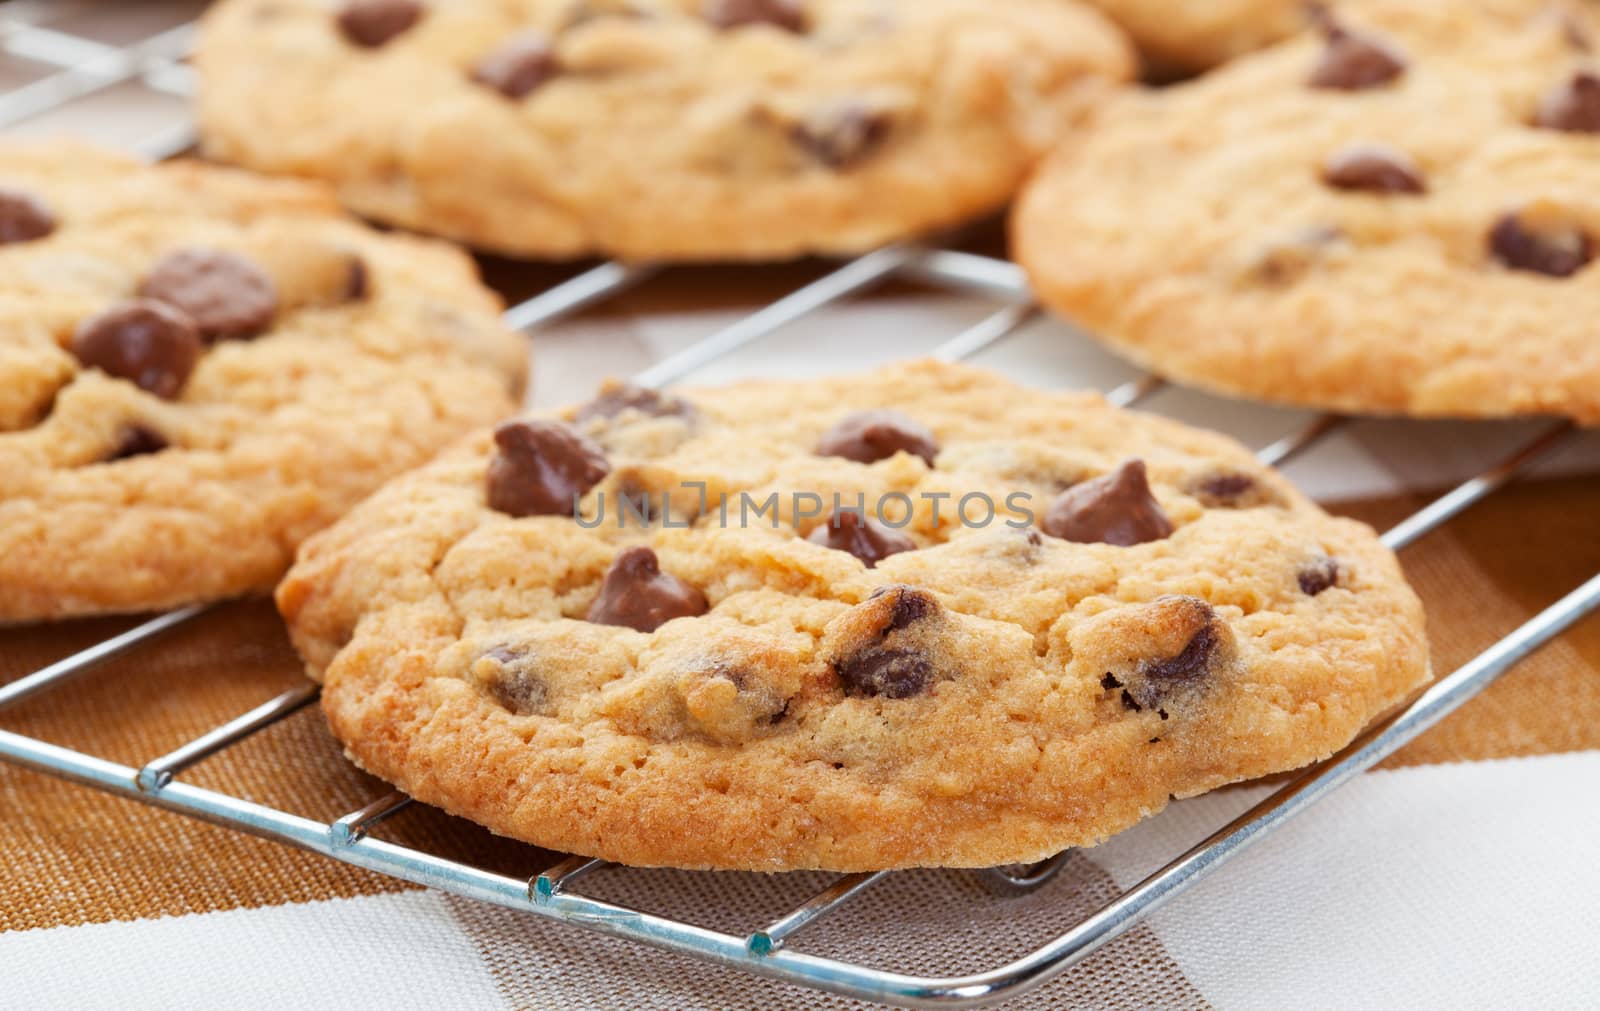 Warm, golden brown, chocolate chip cookies cooling on a rack.  Shallow depth of field.